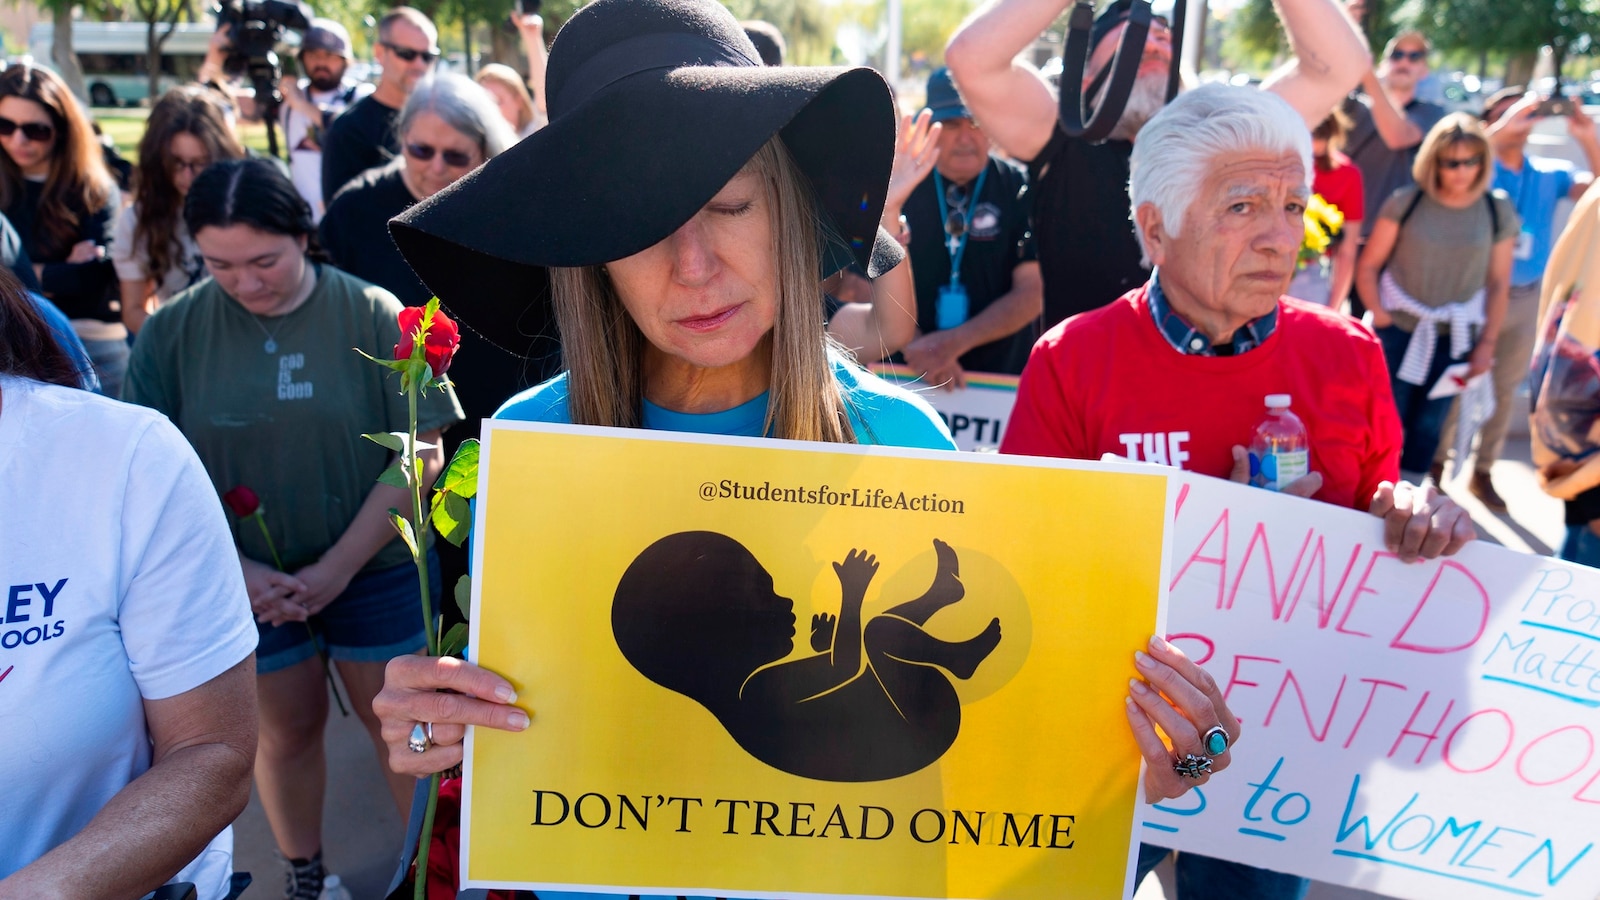 Ignoring Trump, Arizona Republicans don’t want to move too fast to repeal 1864 abortion ban [Video]